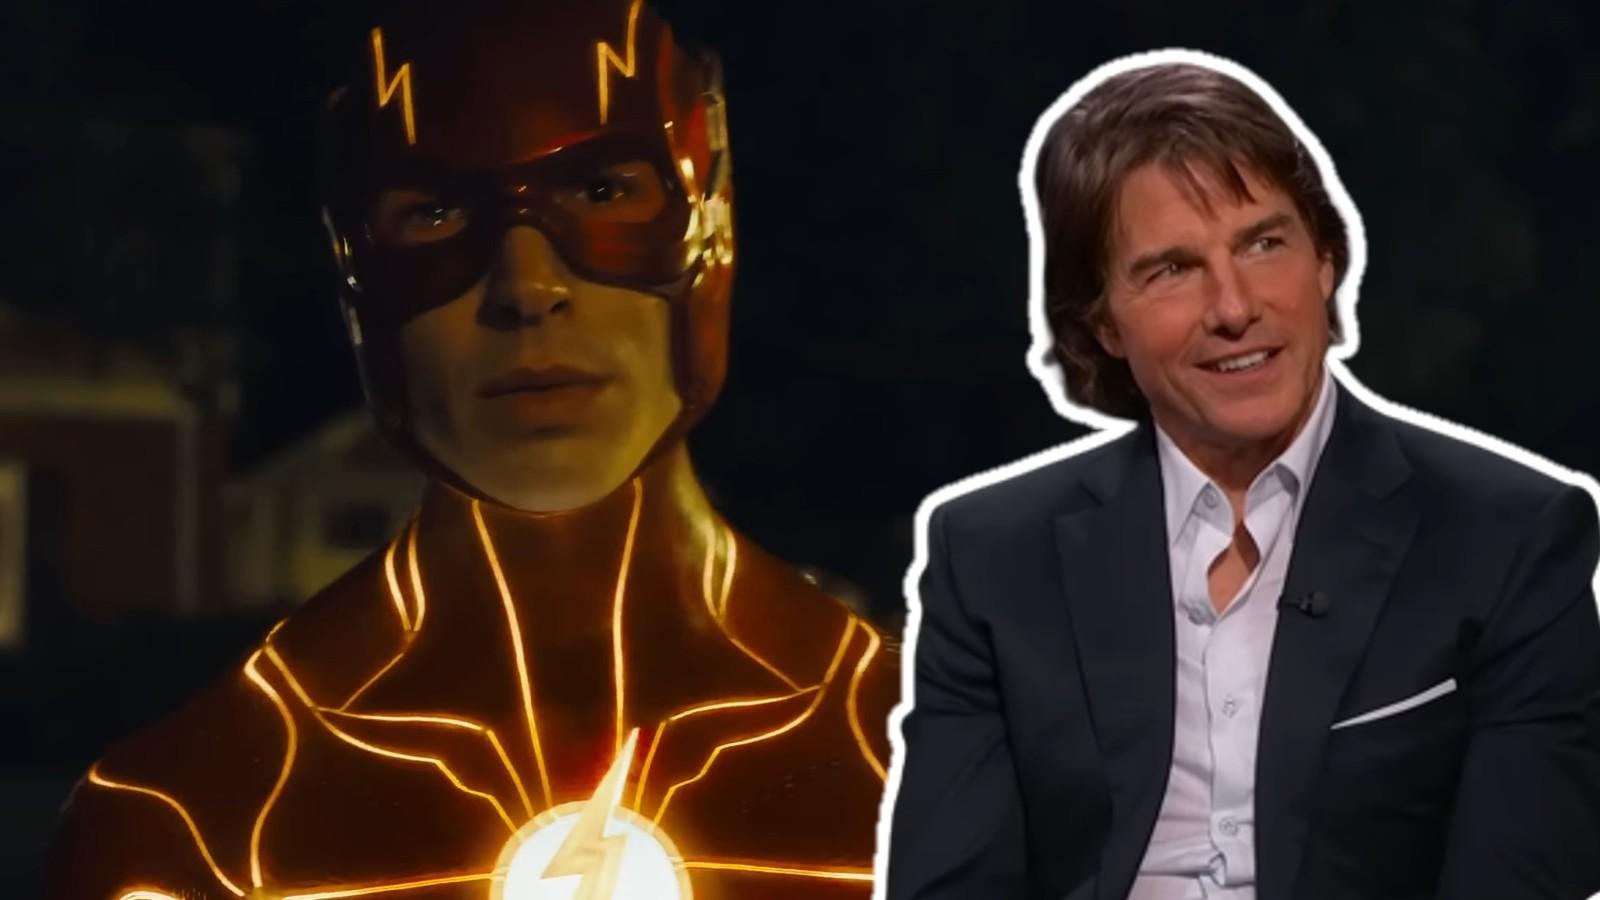 Tom Cruise Has Seen The Flash Movie and He Loved It – The Hollywood Reporter